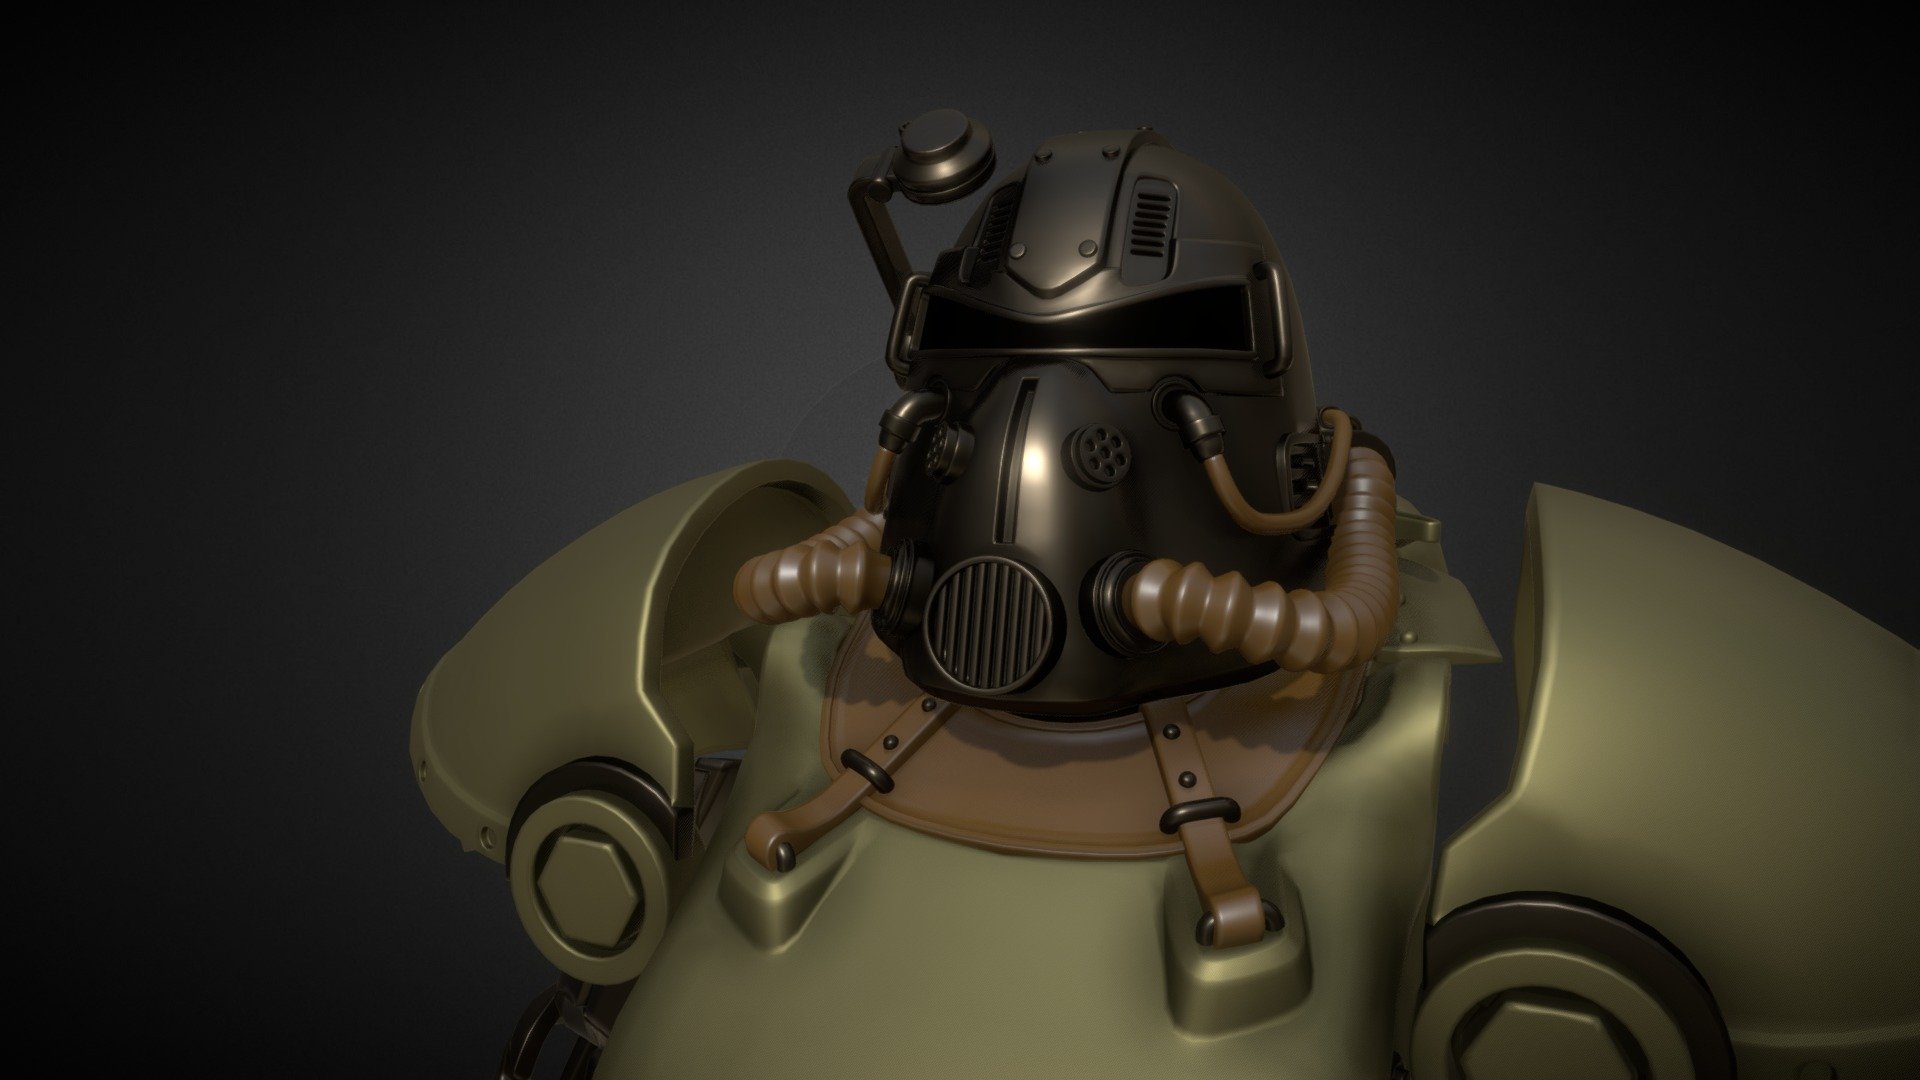 Power Armor from Fallout. Model T51